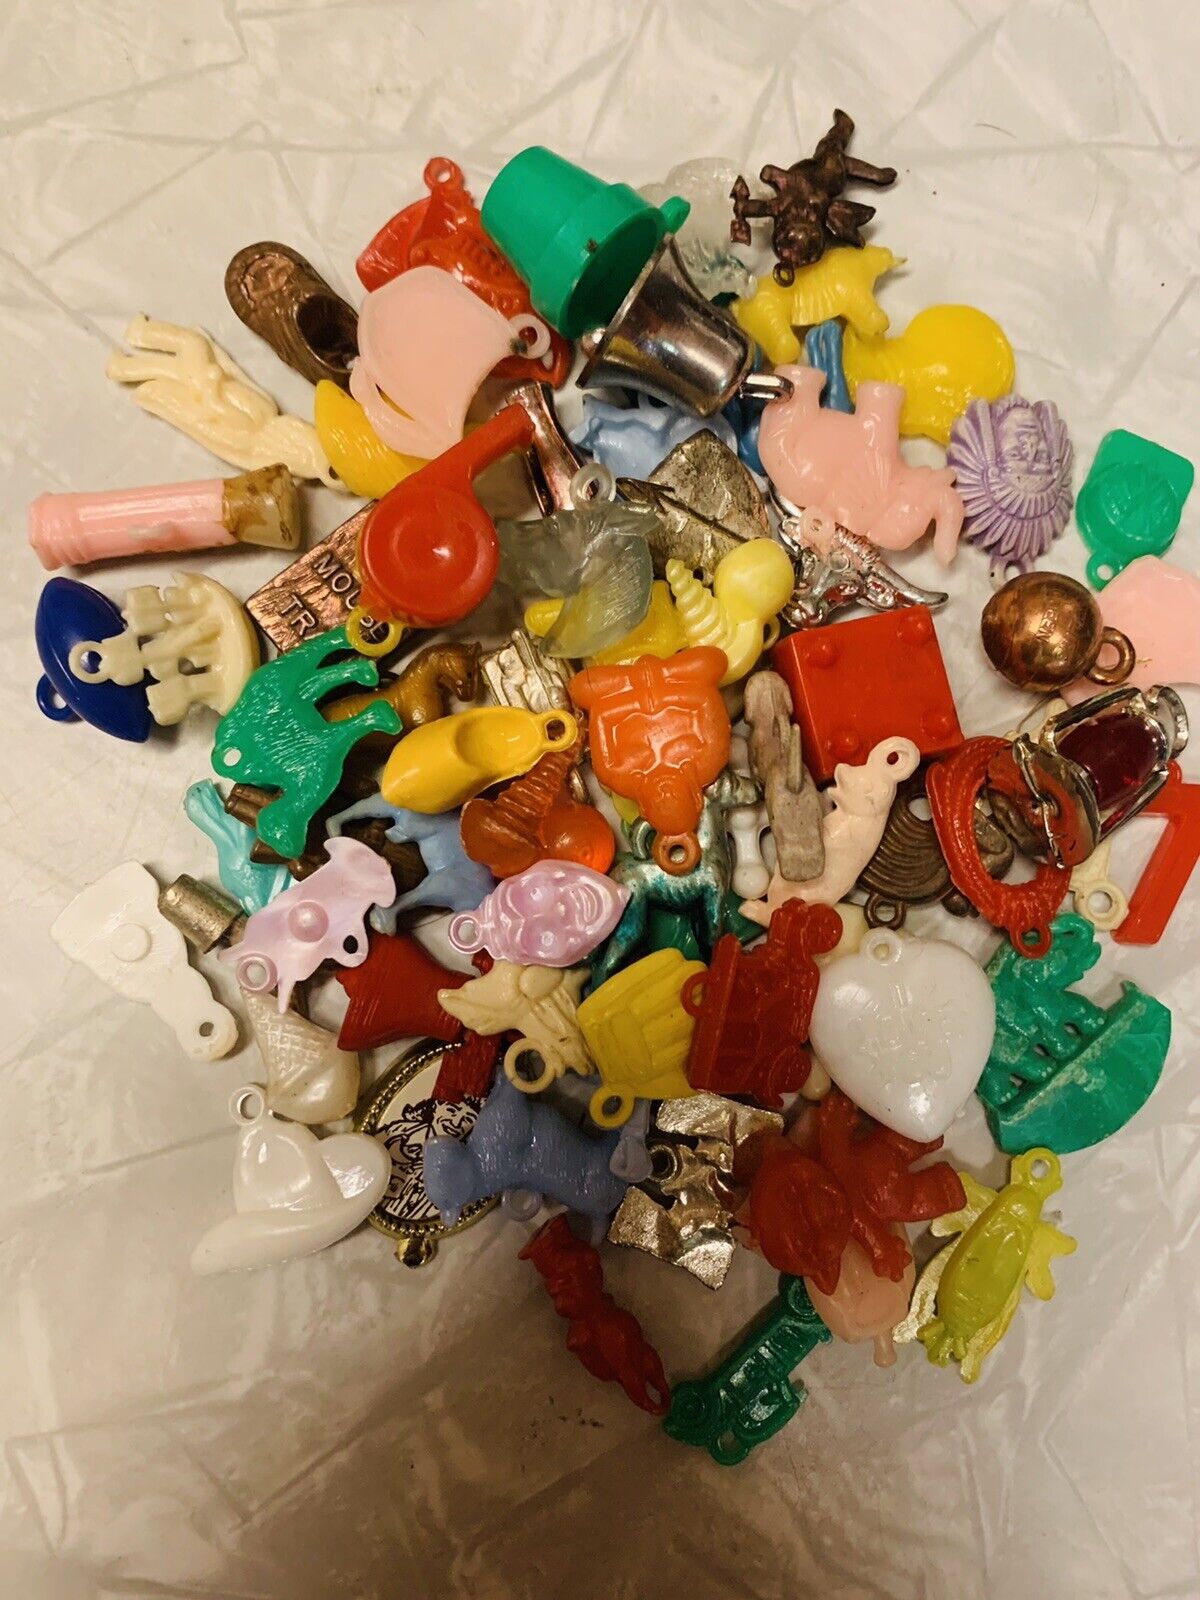 gumball prizes cracker jack charms premiums vintage toy lot of 75